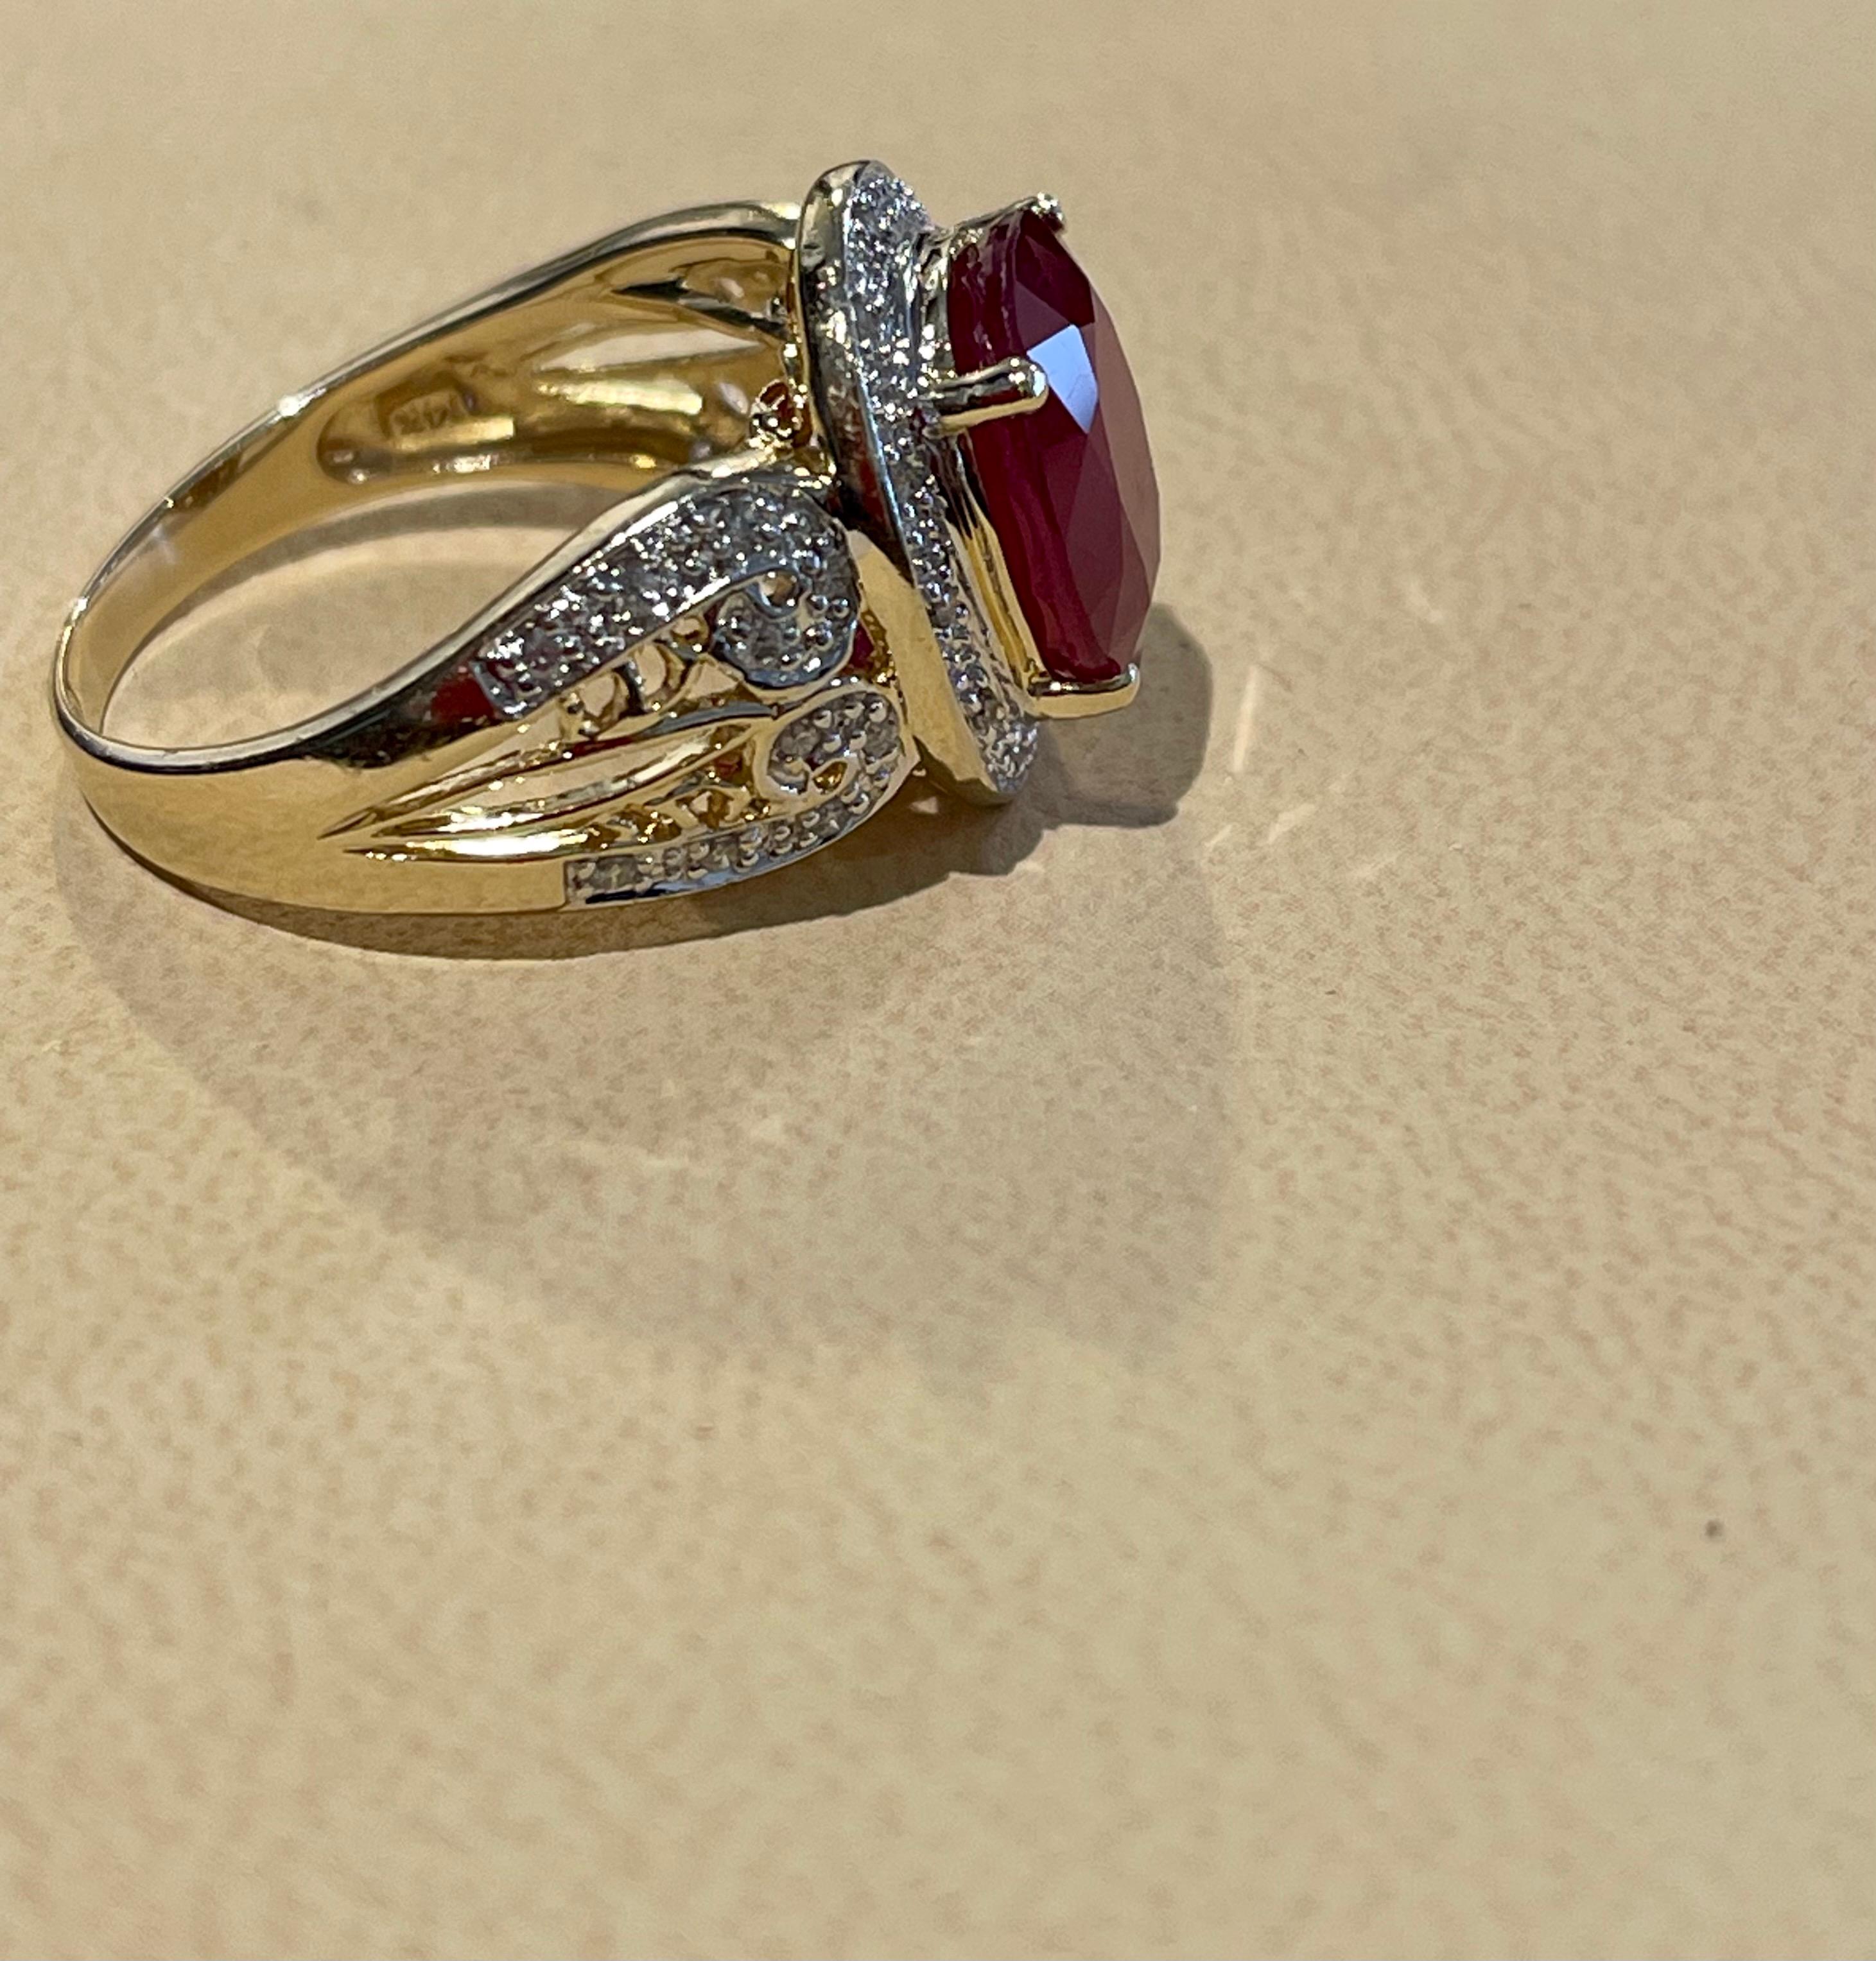 Oval 7.5 Carat Treated Ruby and 1 Carat Diamond 14 Karat Yellow Gold Ring For Sale 2